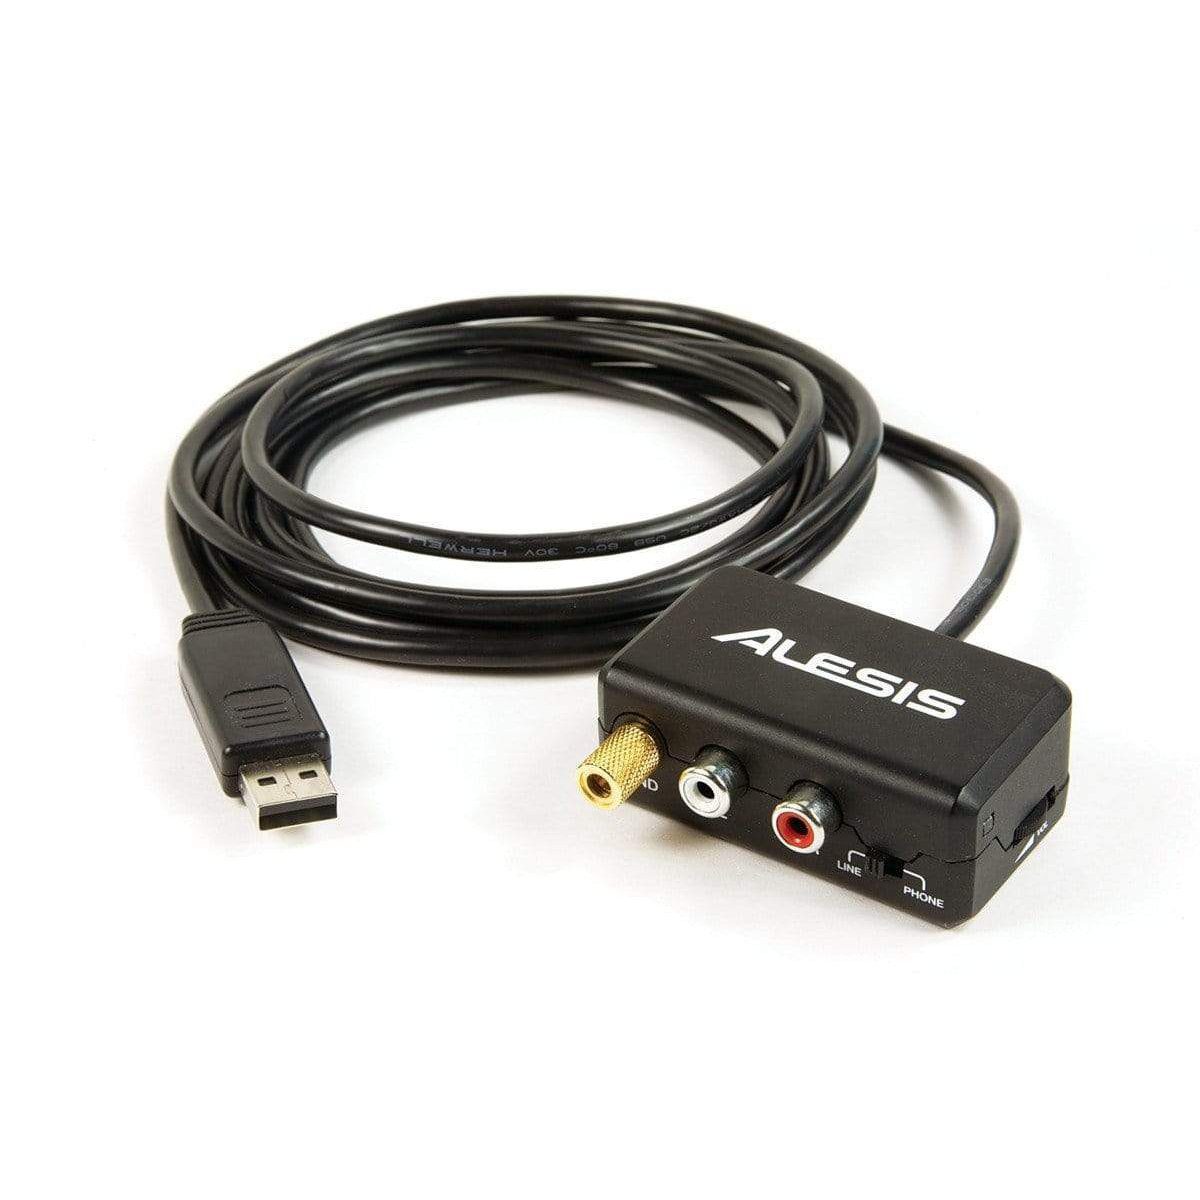 Alesis PhonoLink Stereo RCA-to-USB Cable Interface